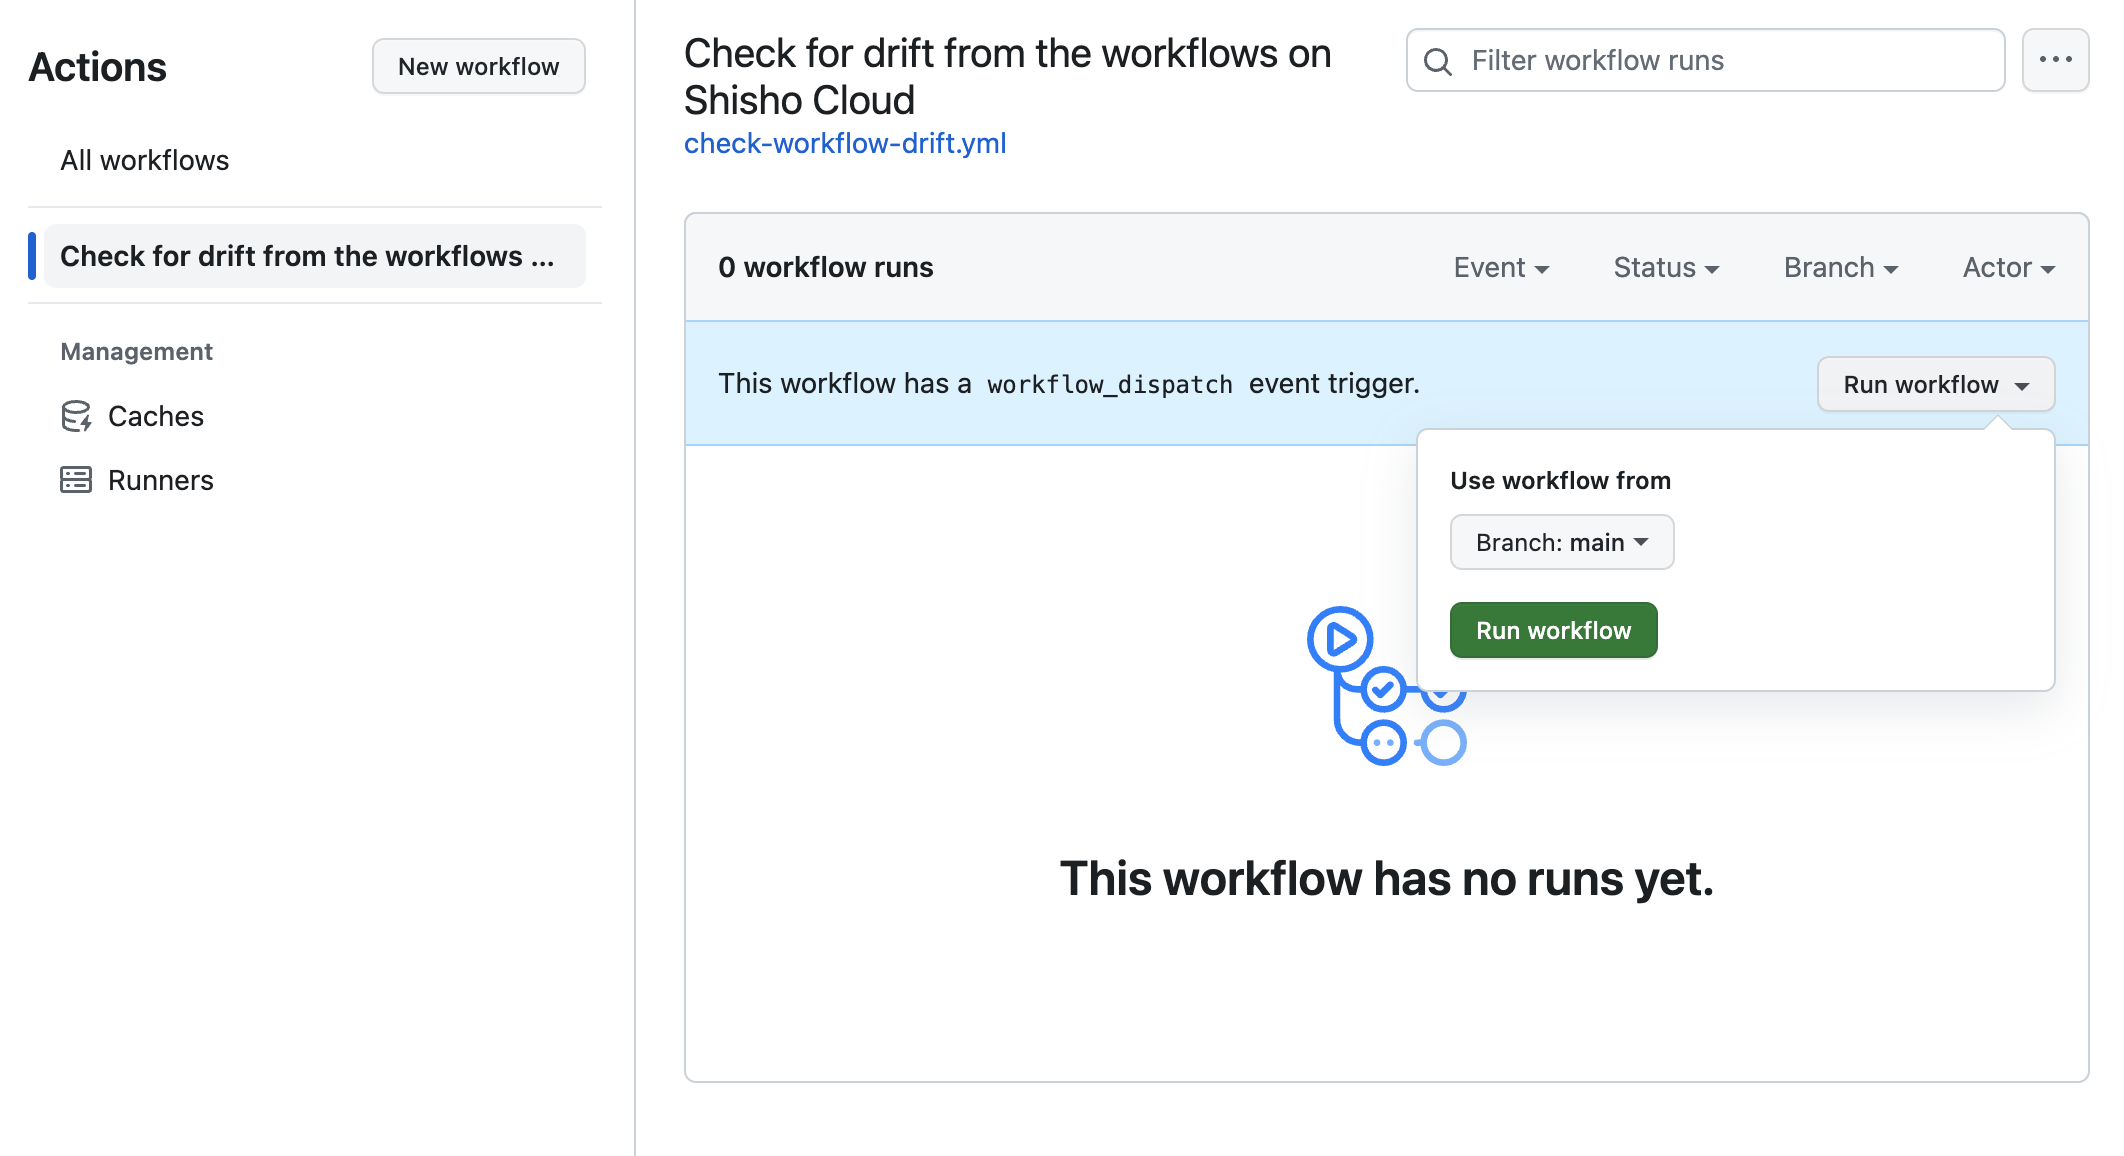 Manually triggering the workflow from the GitHub Actions workflow page